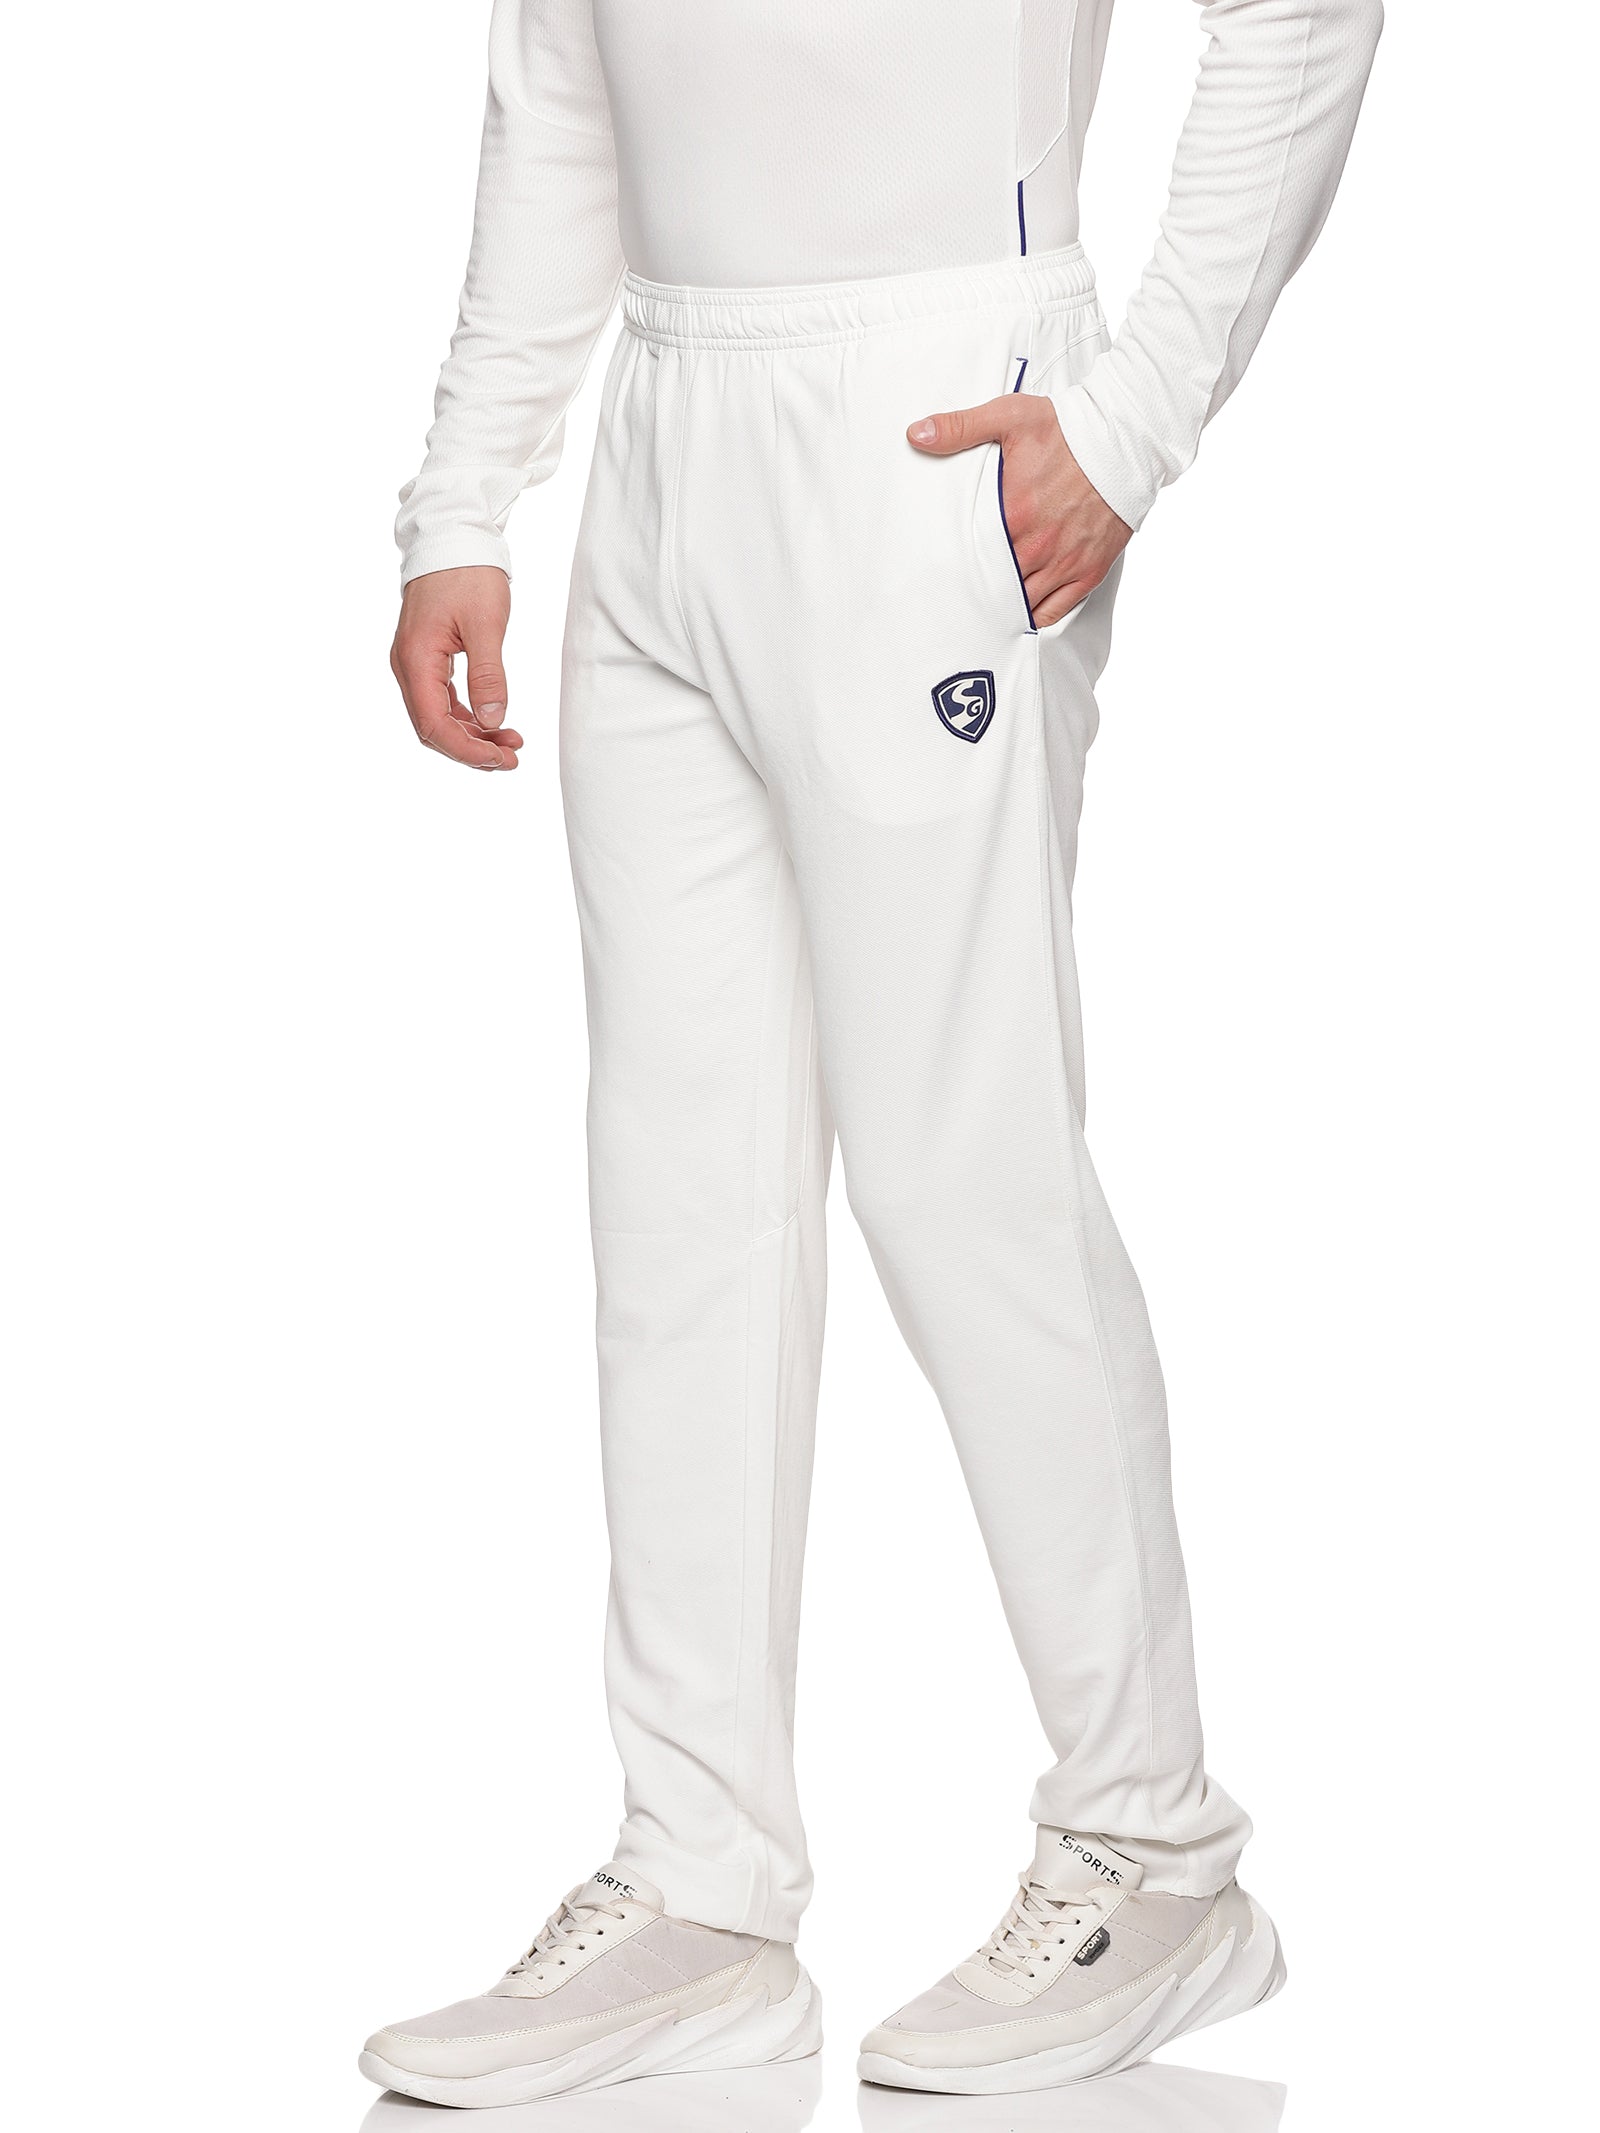 Dukes Bright White Cricket Trousers - CLEARANCE CRICKET CLOTHING